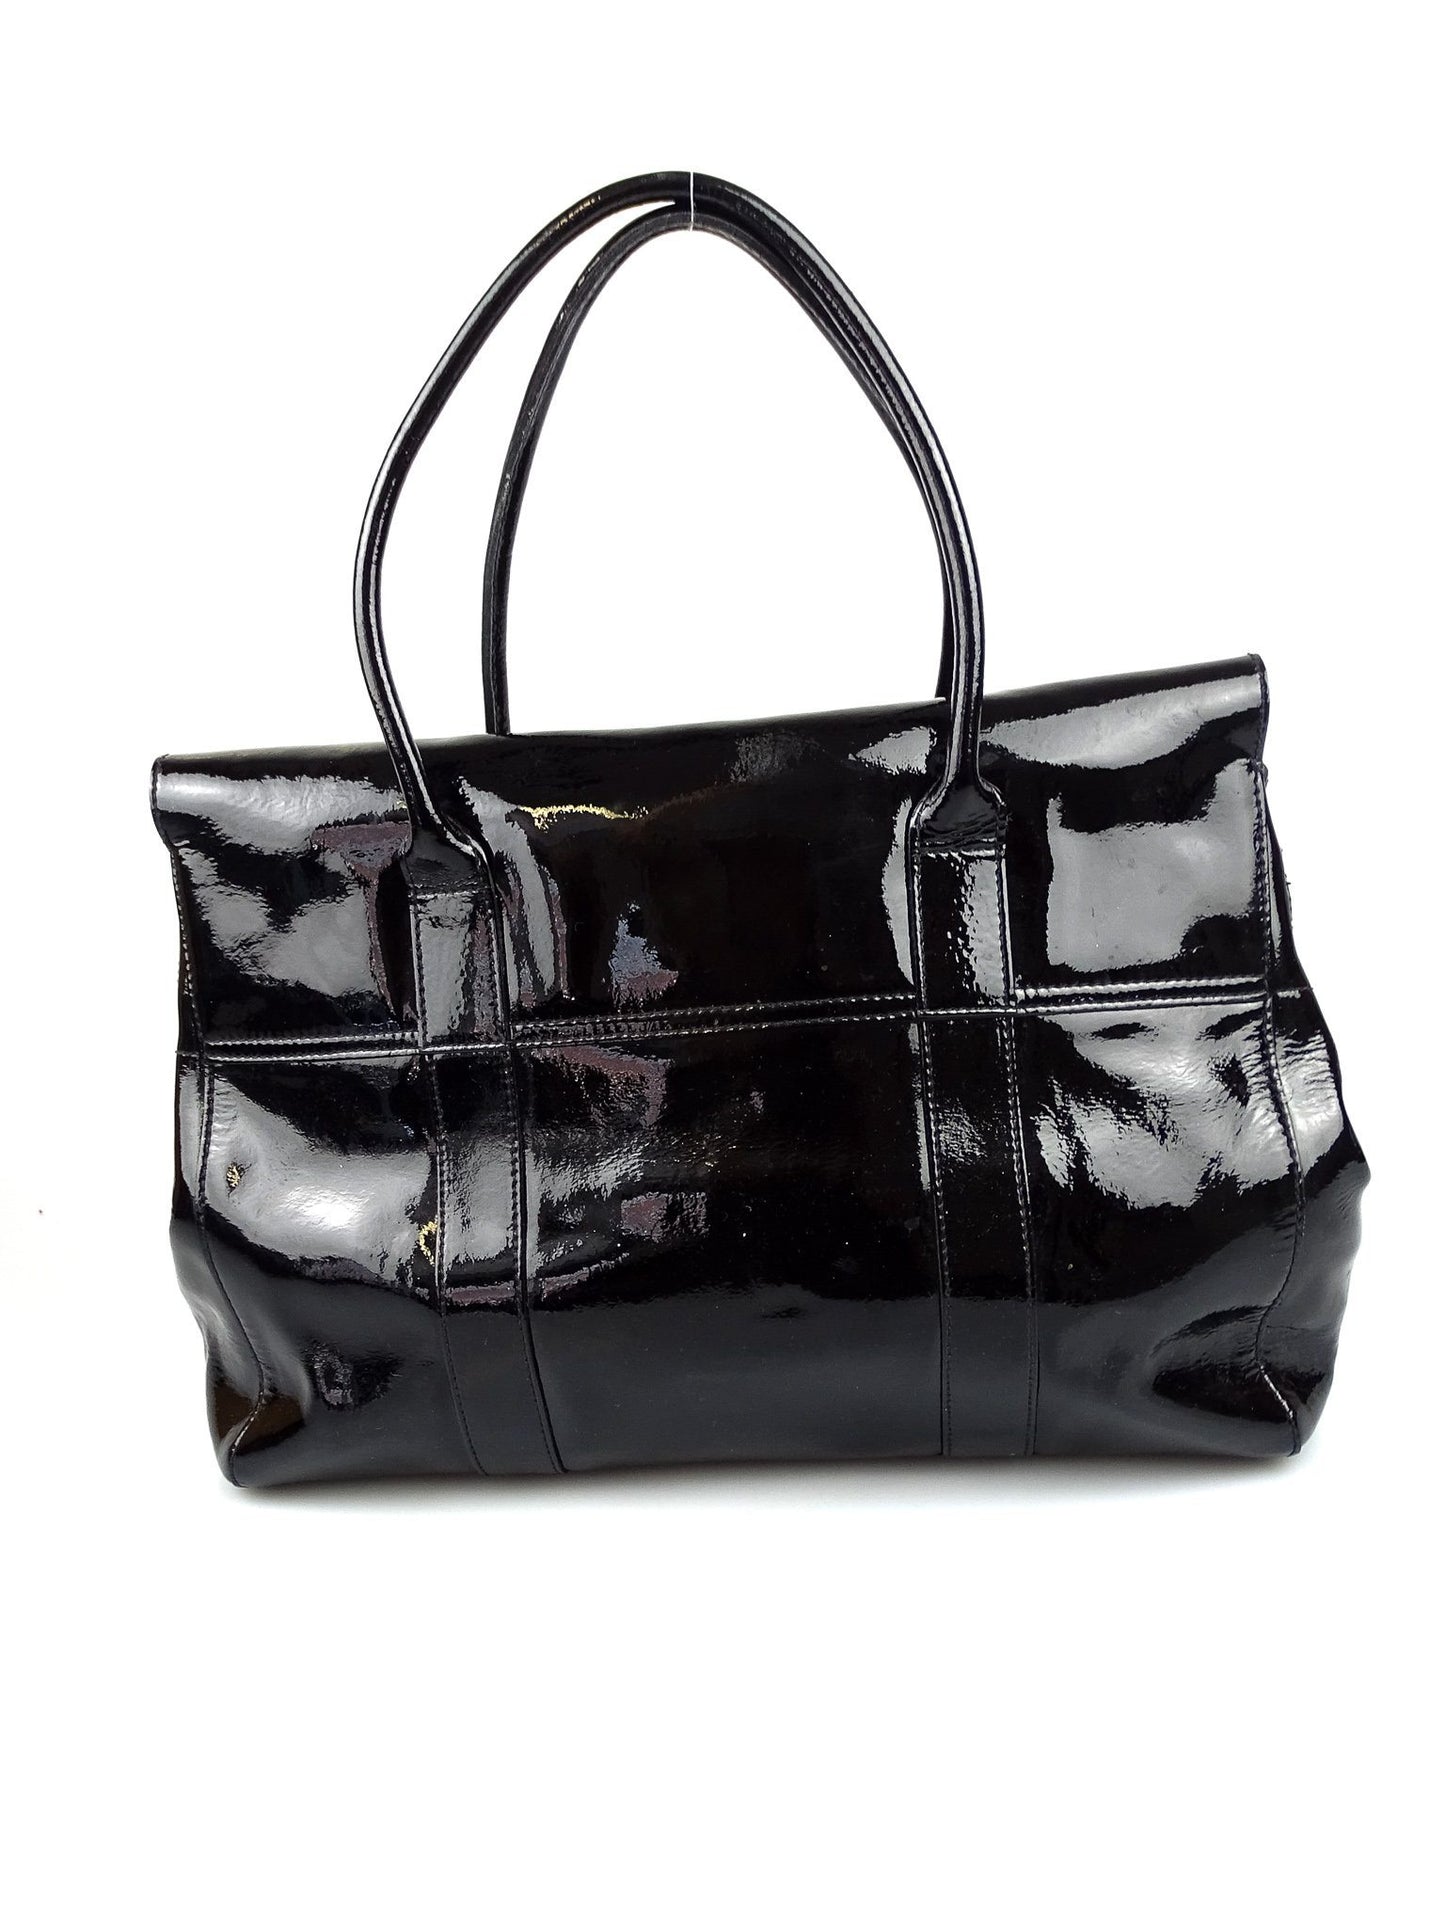 Mulberry Classic Bayswater in Black Drummed Patent Leather with Silver Hardware Bags Mulberry 